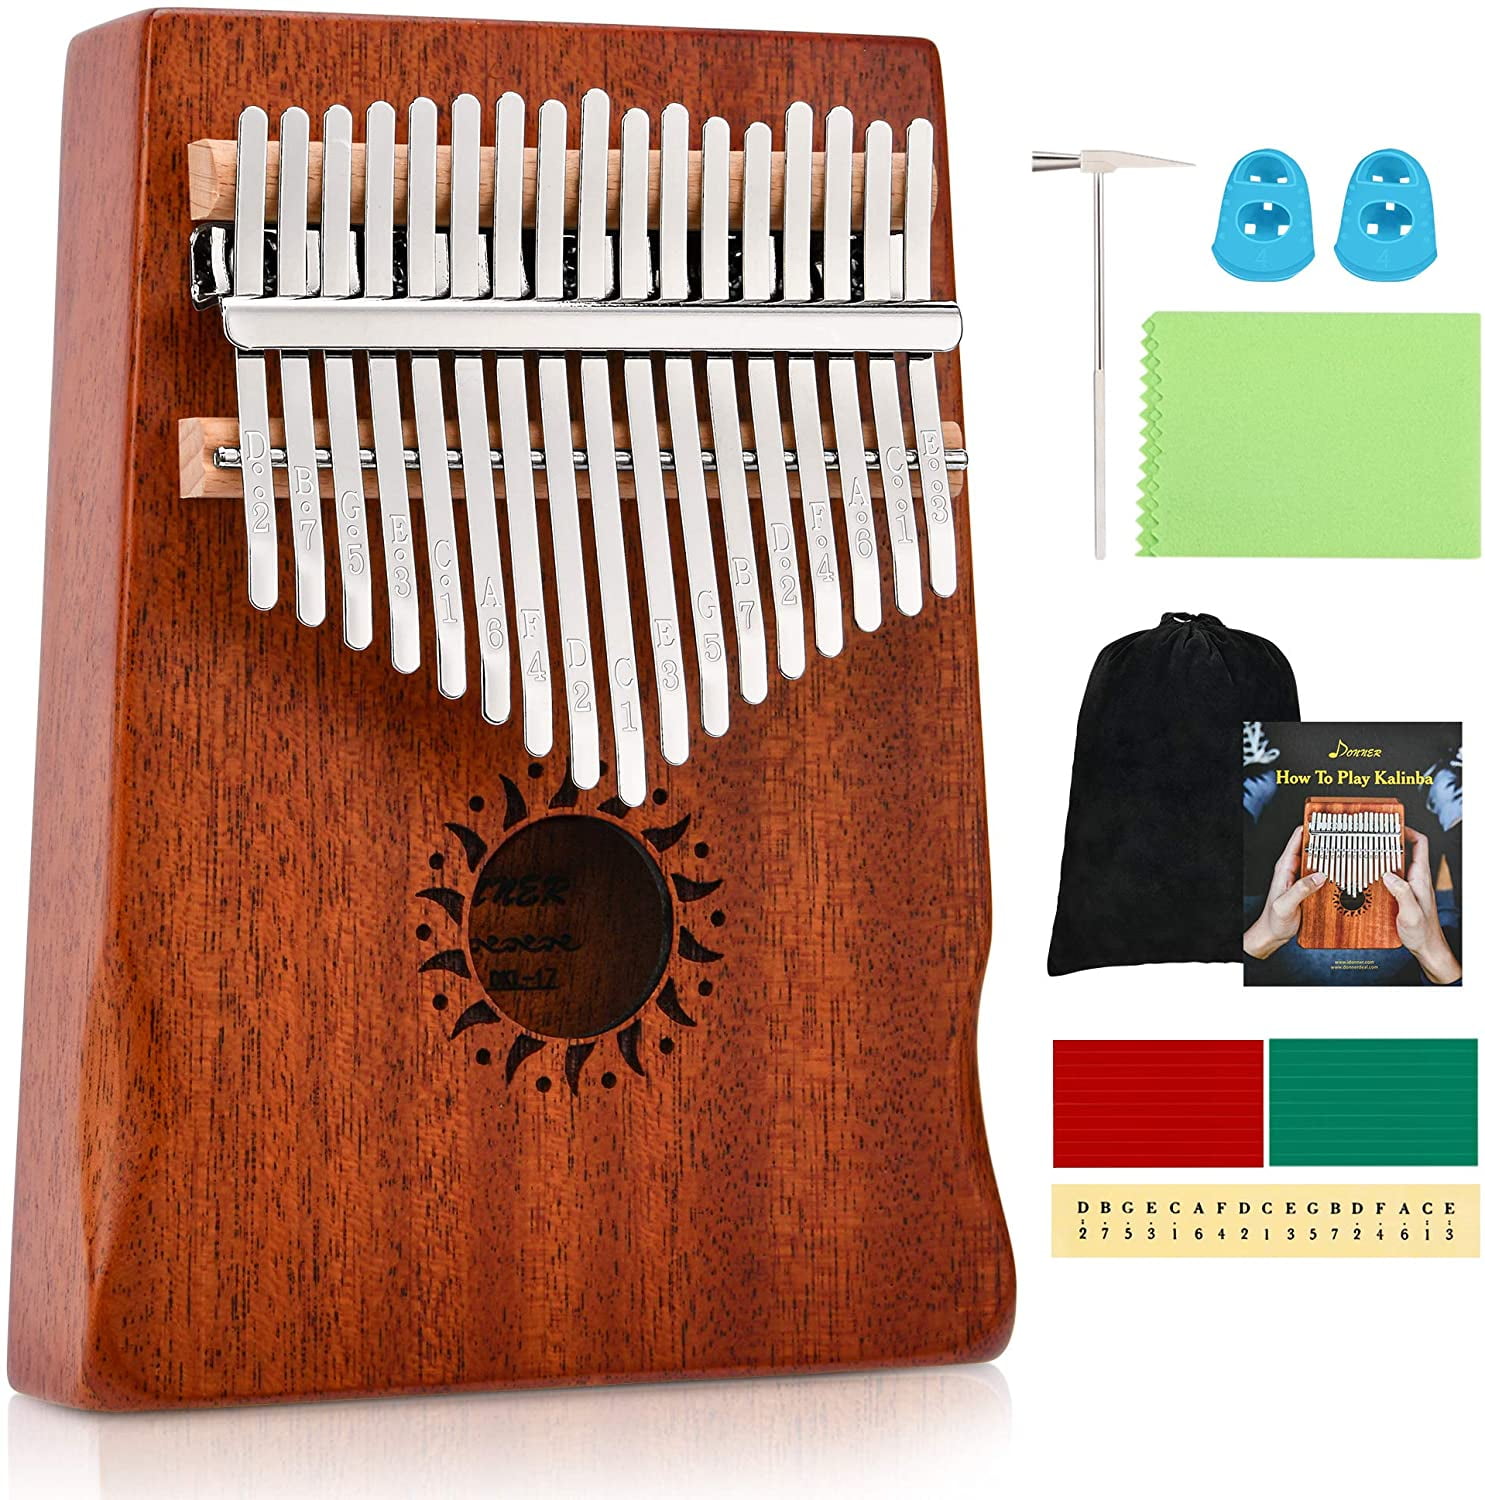 17 Keys Kalimba African Solid Mahogany Body Unique Gift for Kids Adults. Portable Finger Piano Mbira Musical Instrument with Tune Hammer Key Stickers and Bag Instruction Book Wood Thumb Piano 